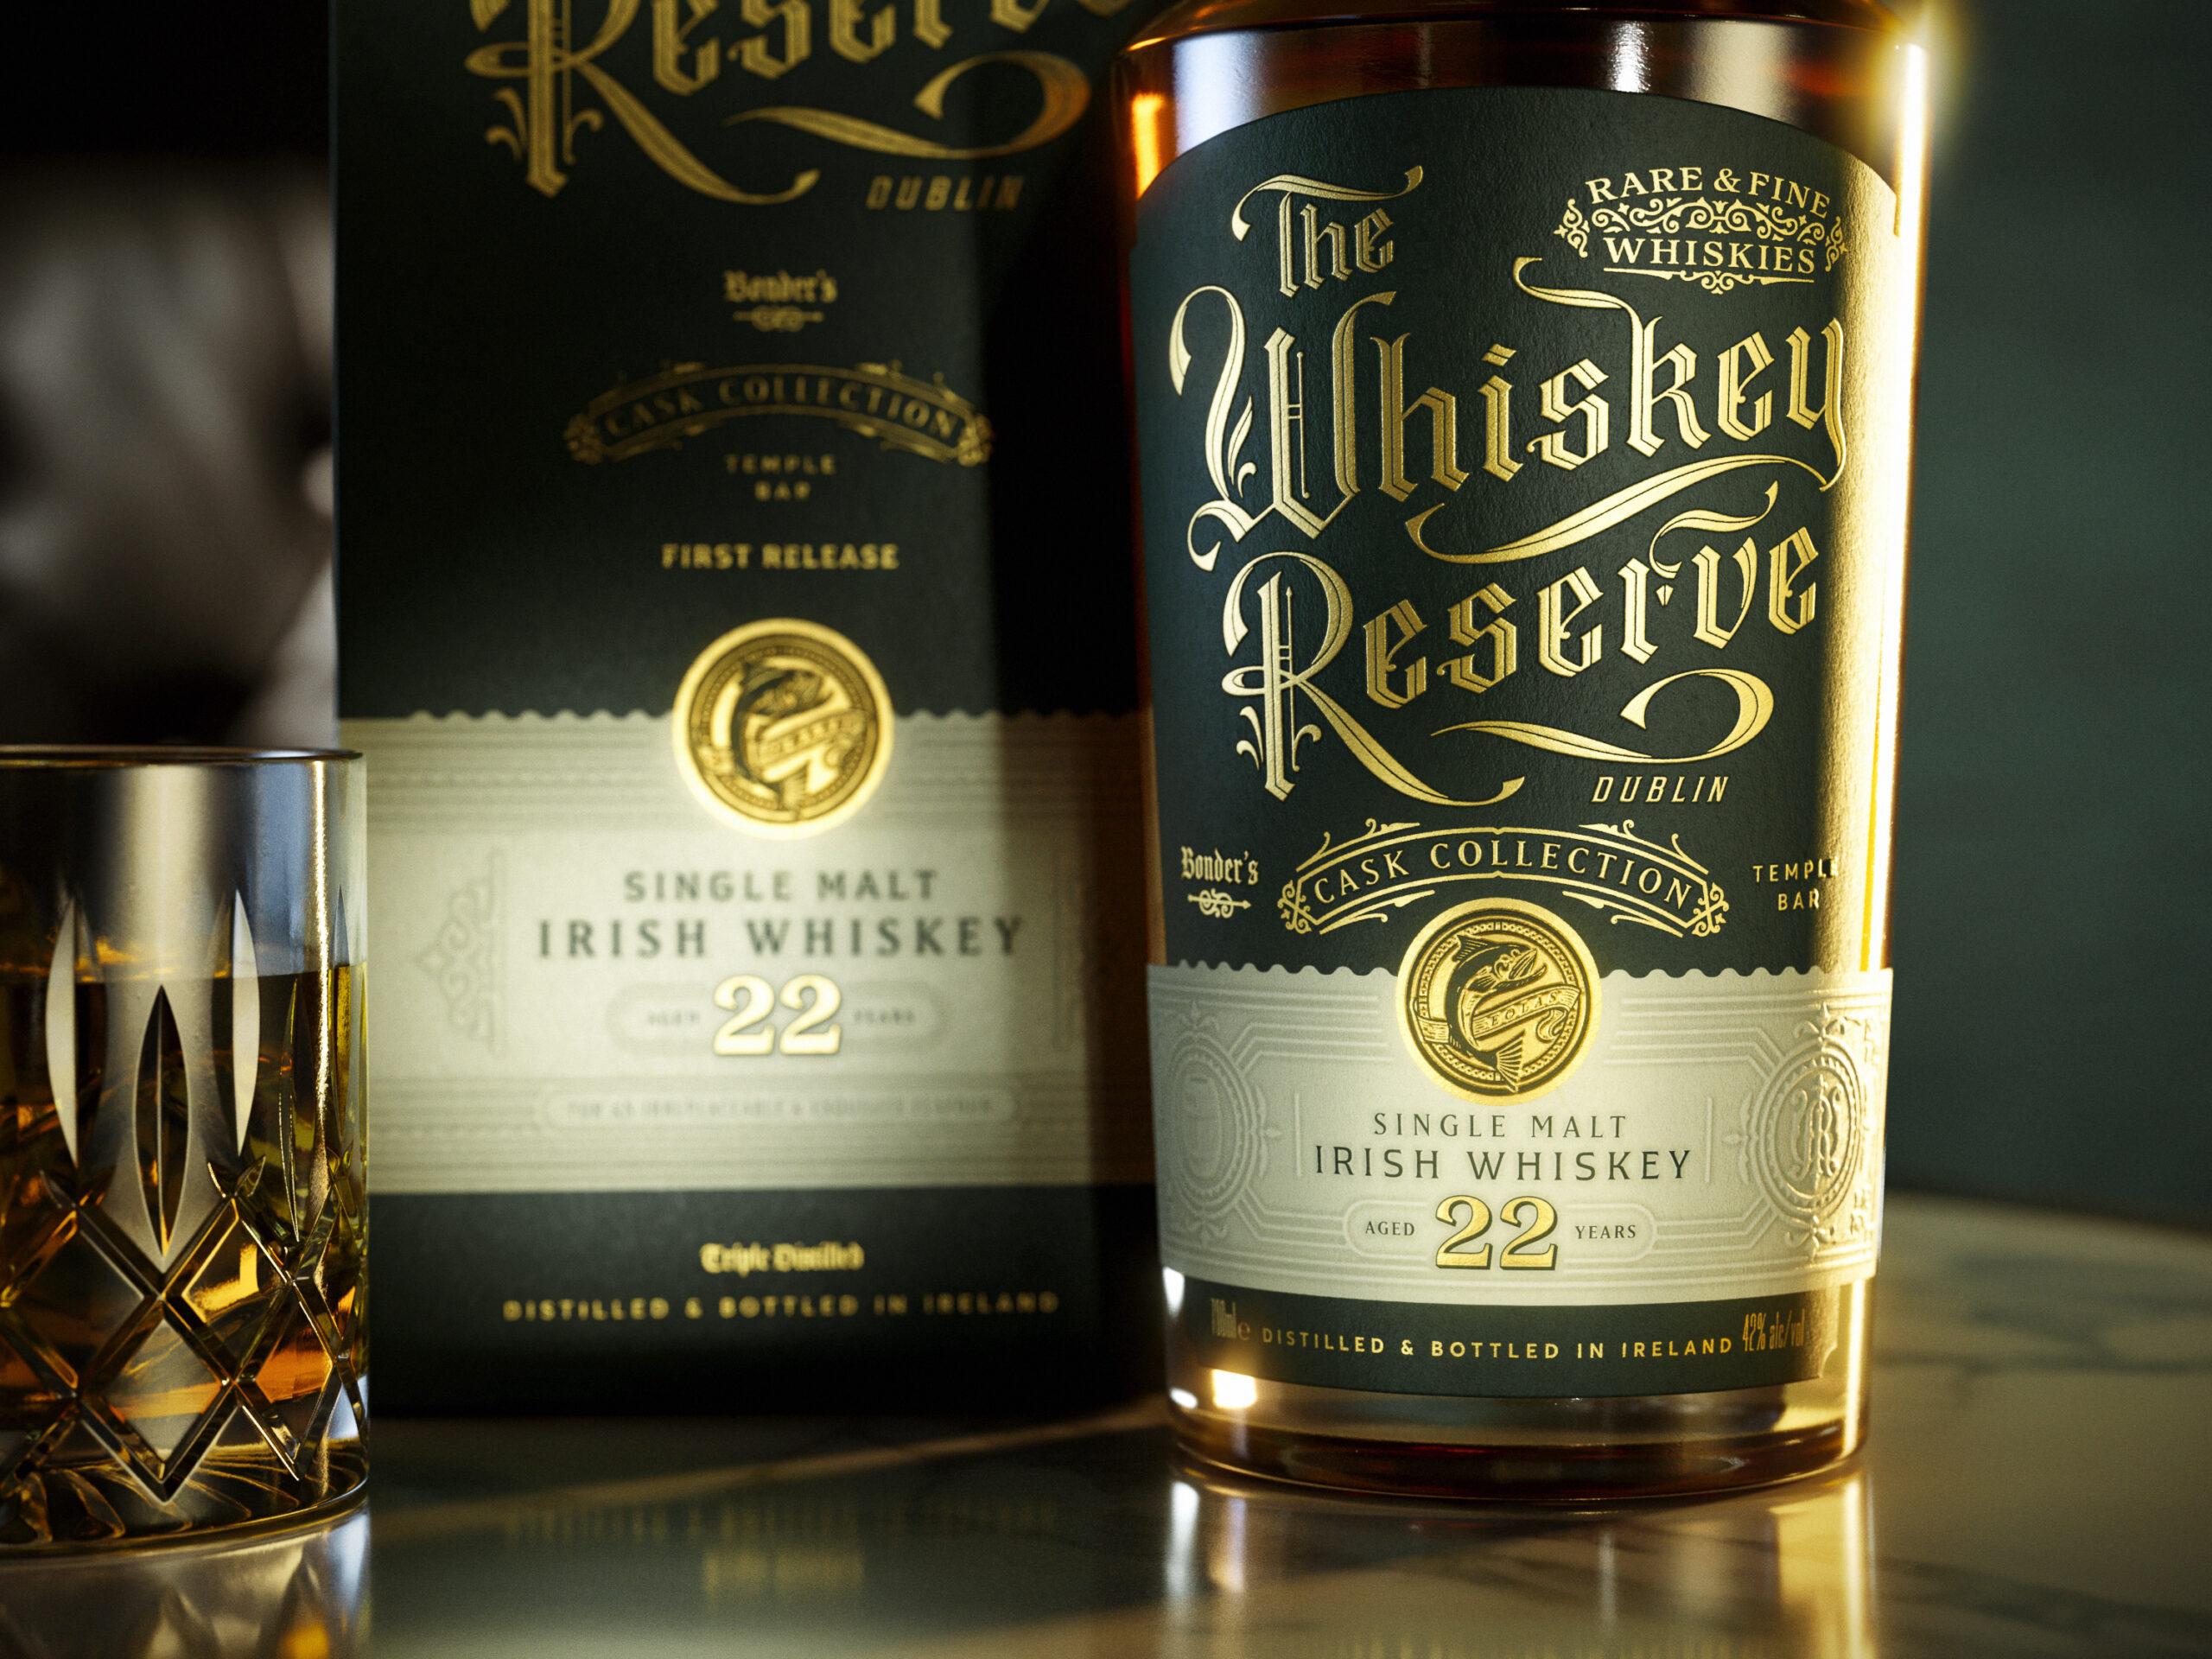 The Whiskey Reserve